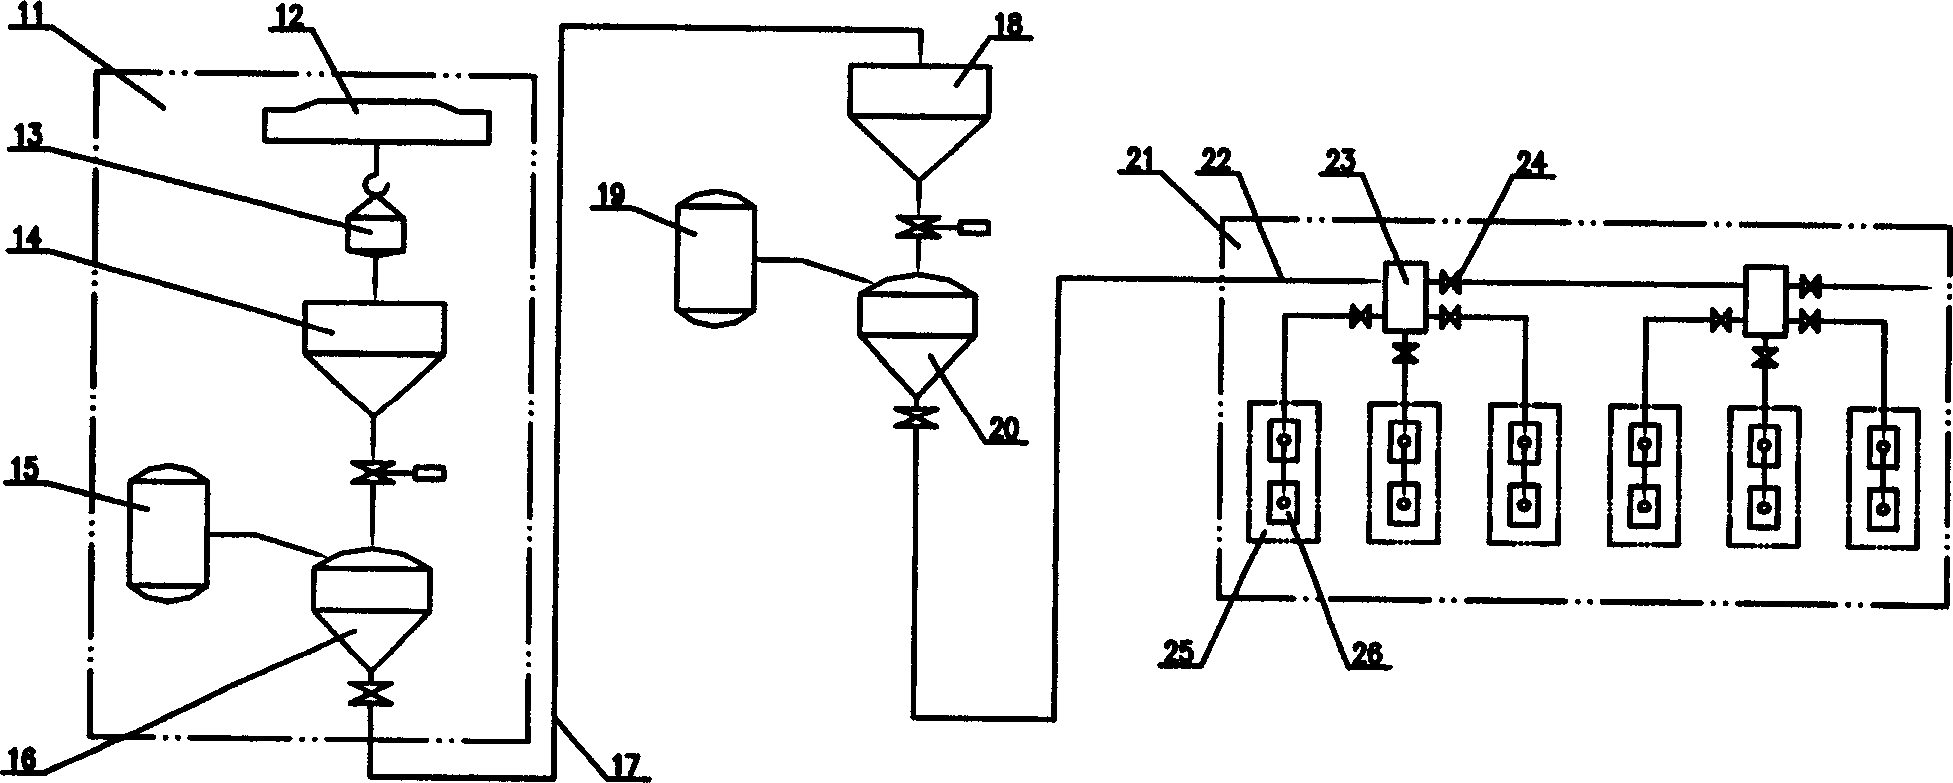 Charging method of adding aluminium fluoride into electrolytic bath fluoride salt material box and its charging device